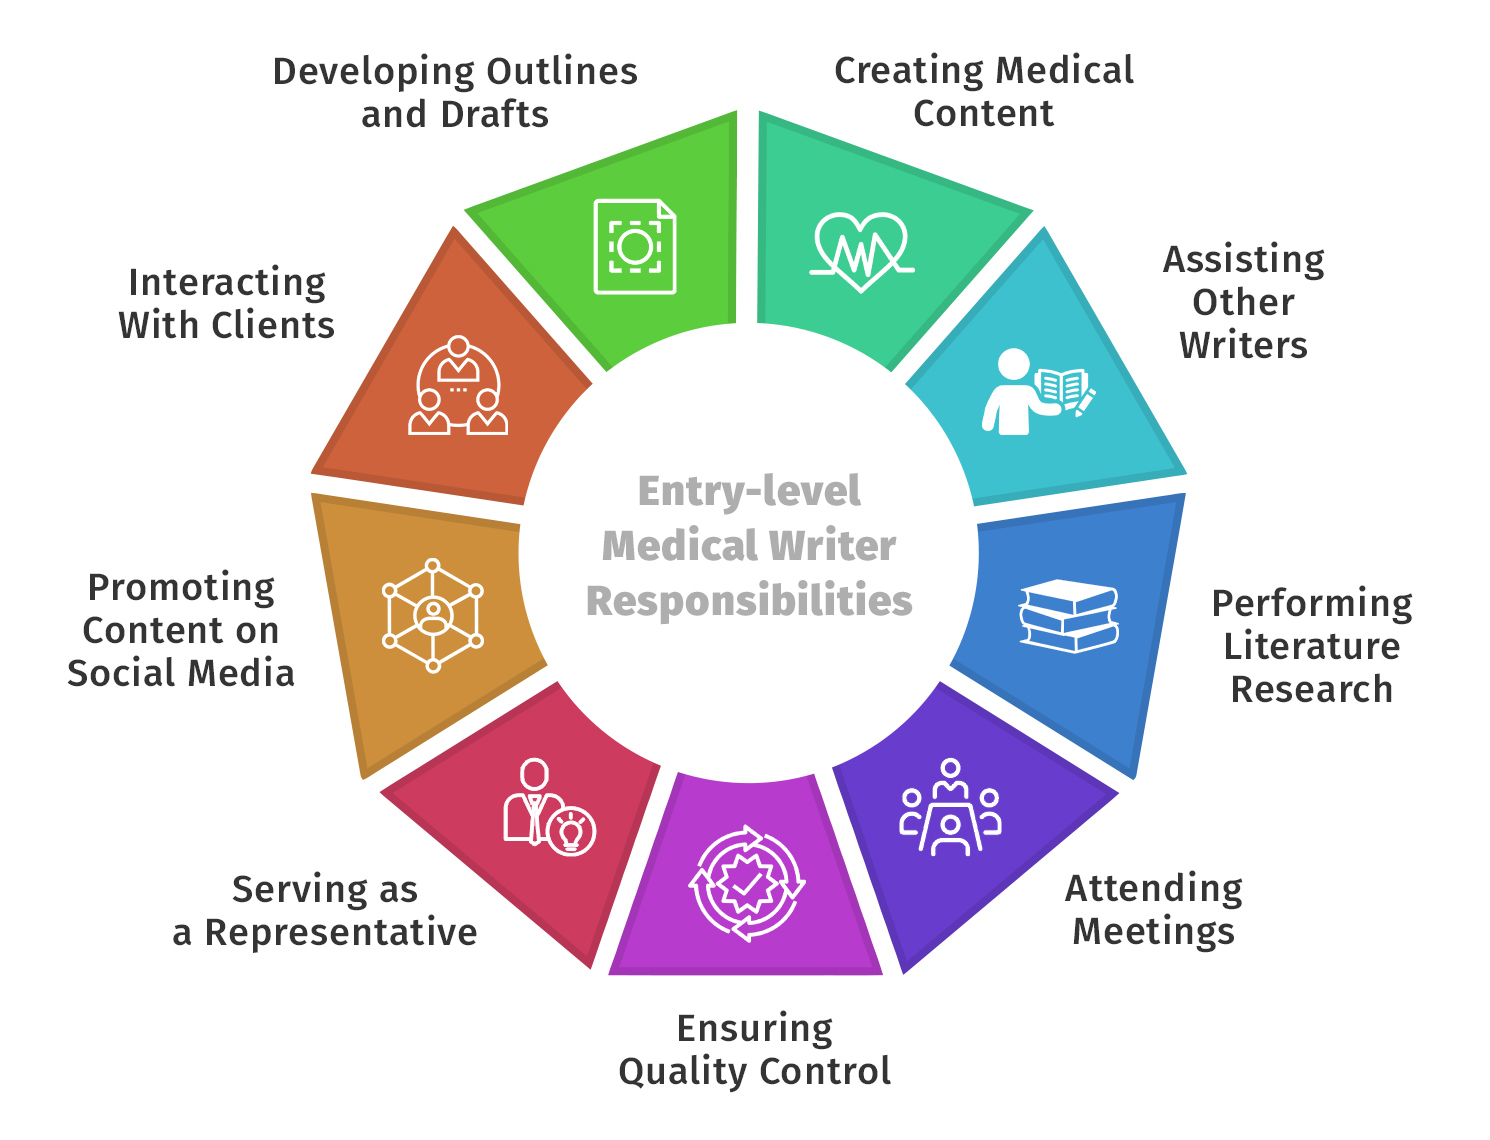 Entry-level medical writer responsibilities